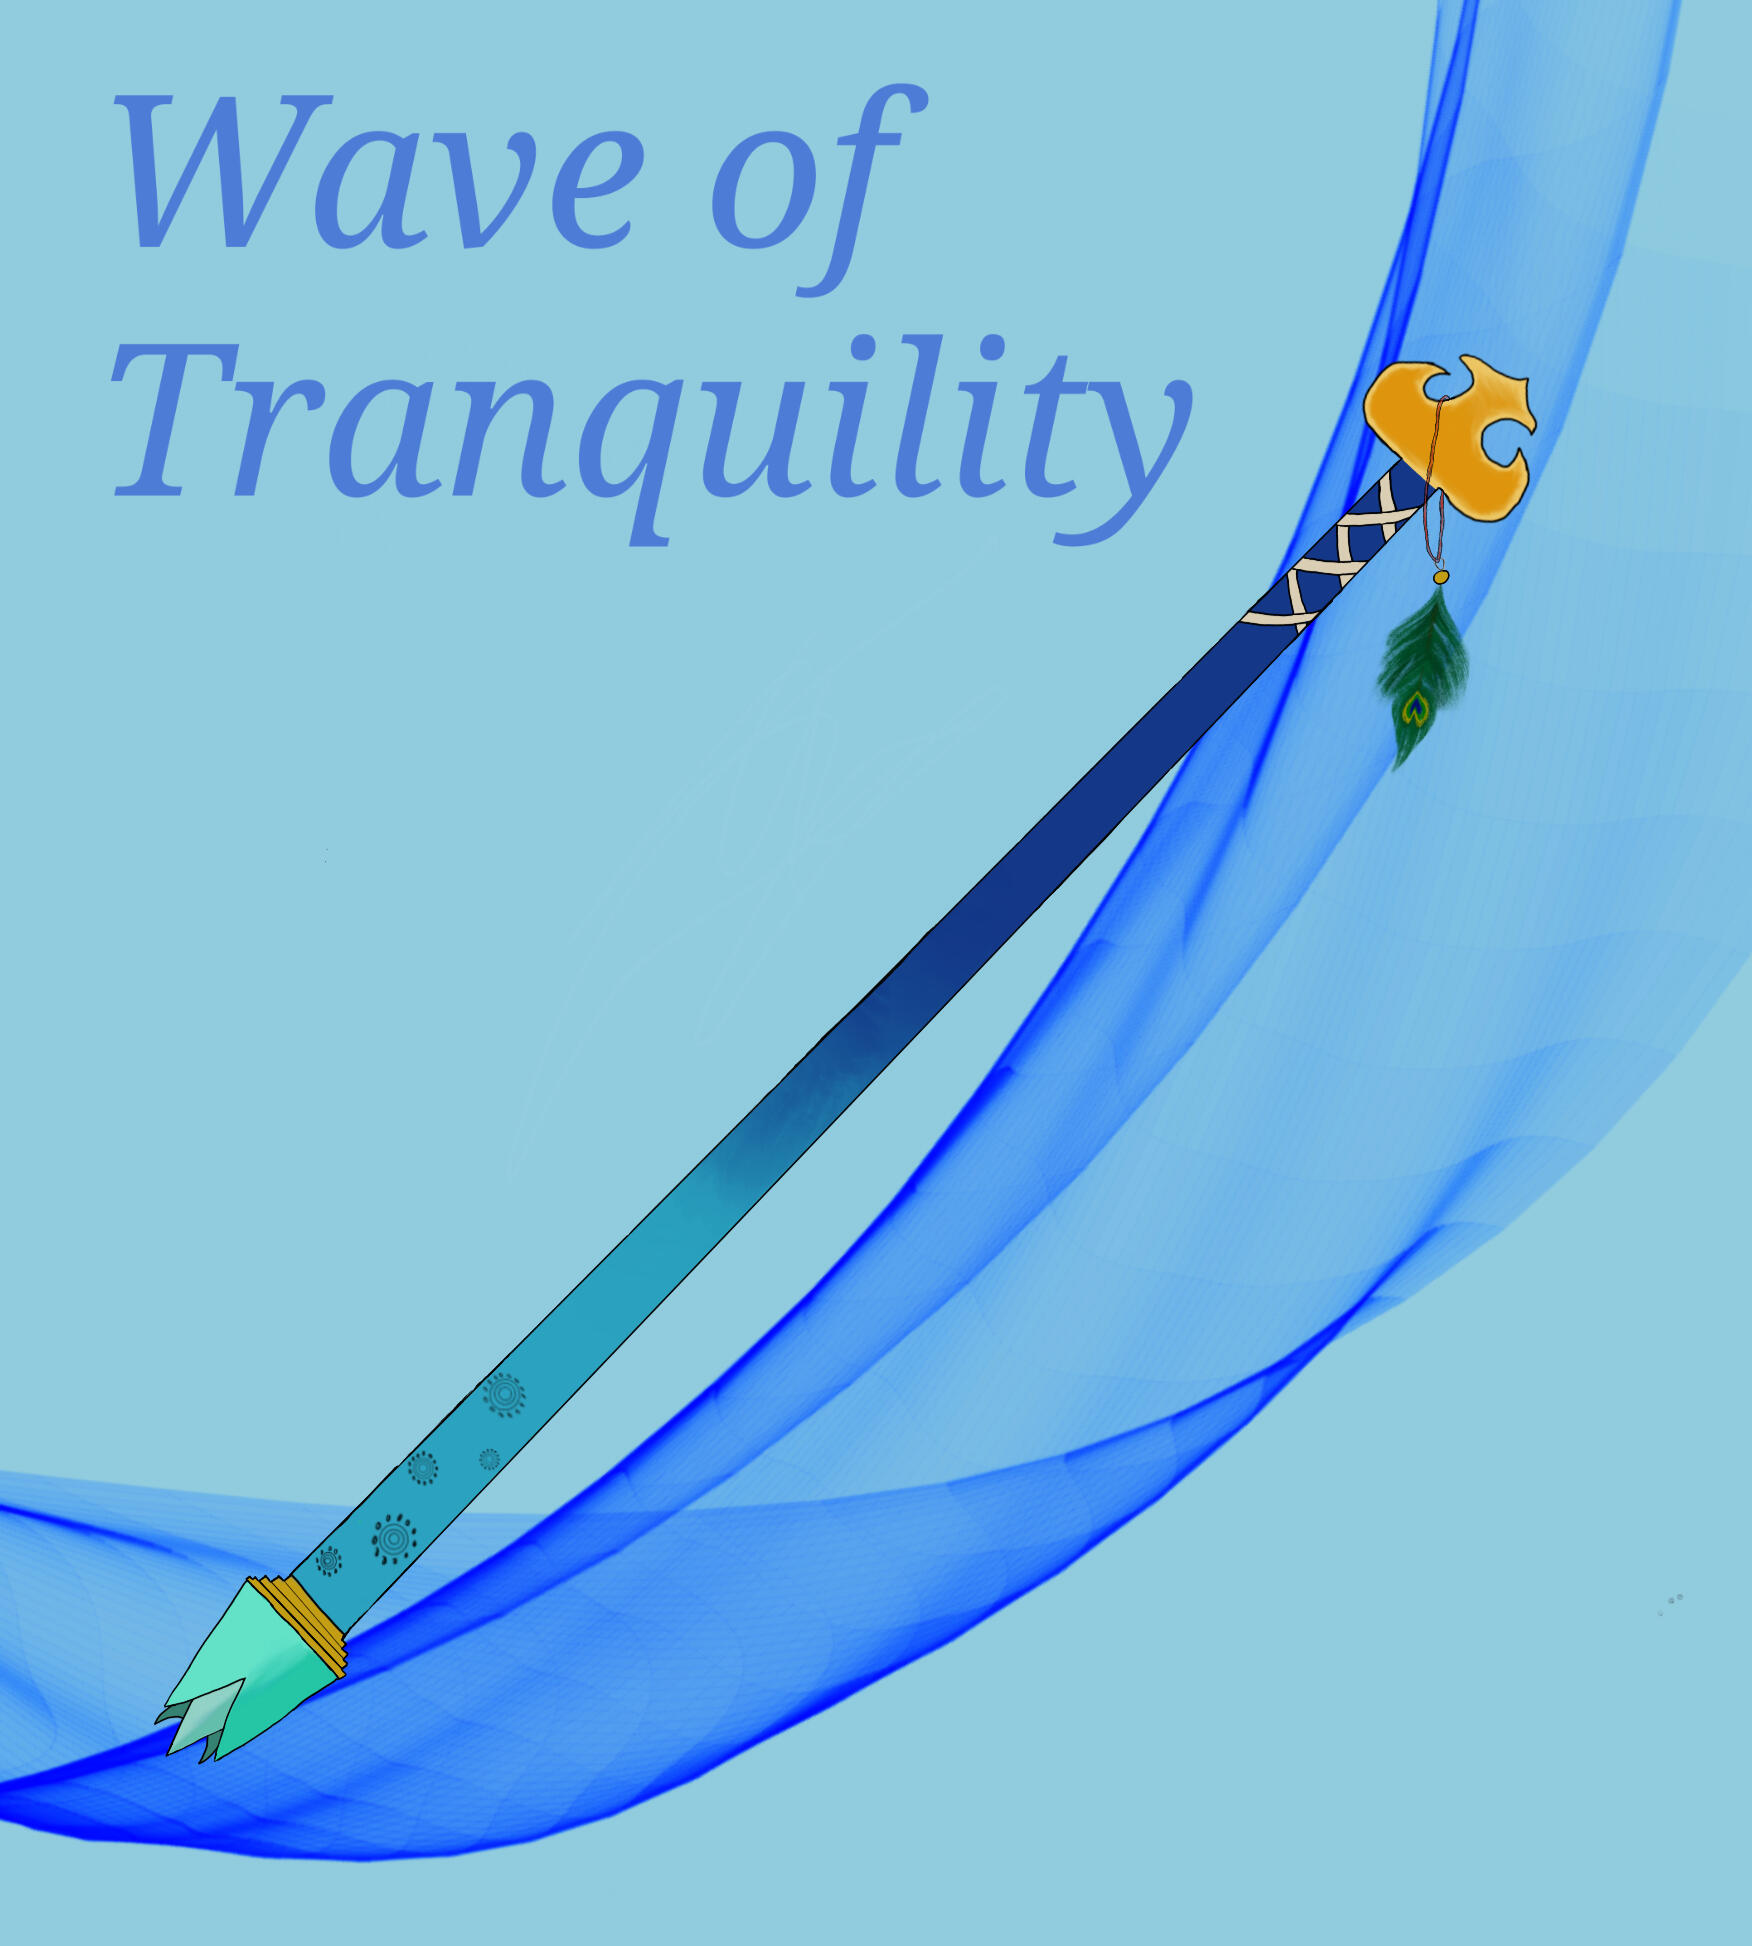 This is a weapon drawing I did during my free time. I named this one the &quot;Wave of Tranquility&quot;.